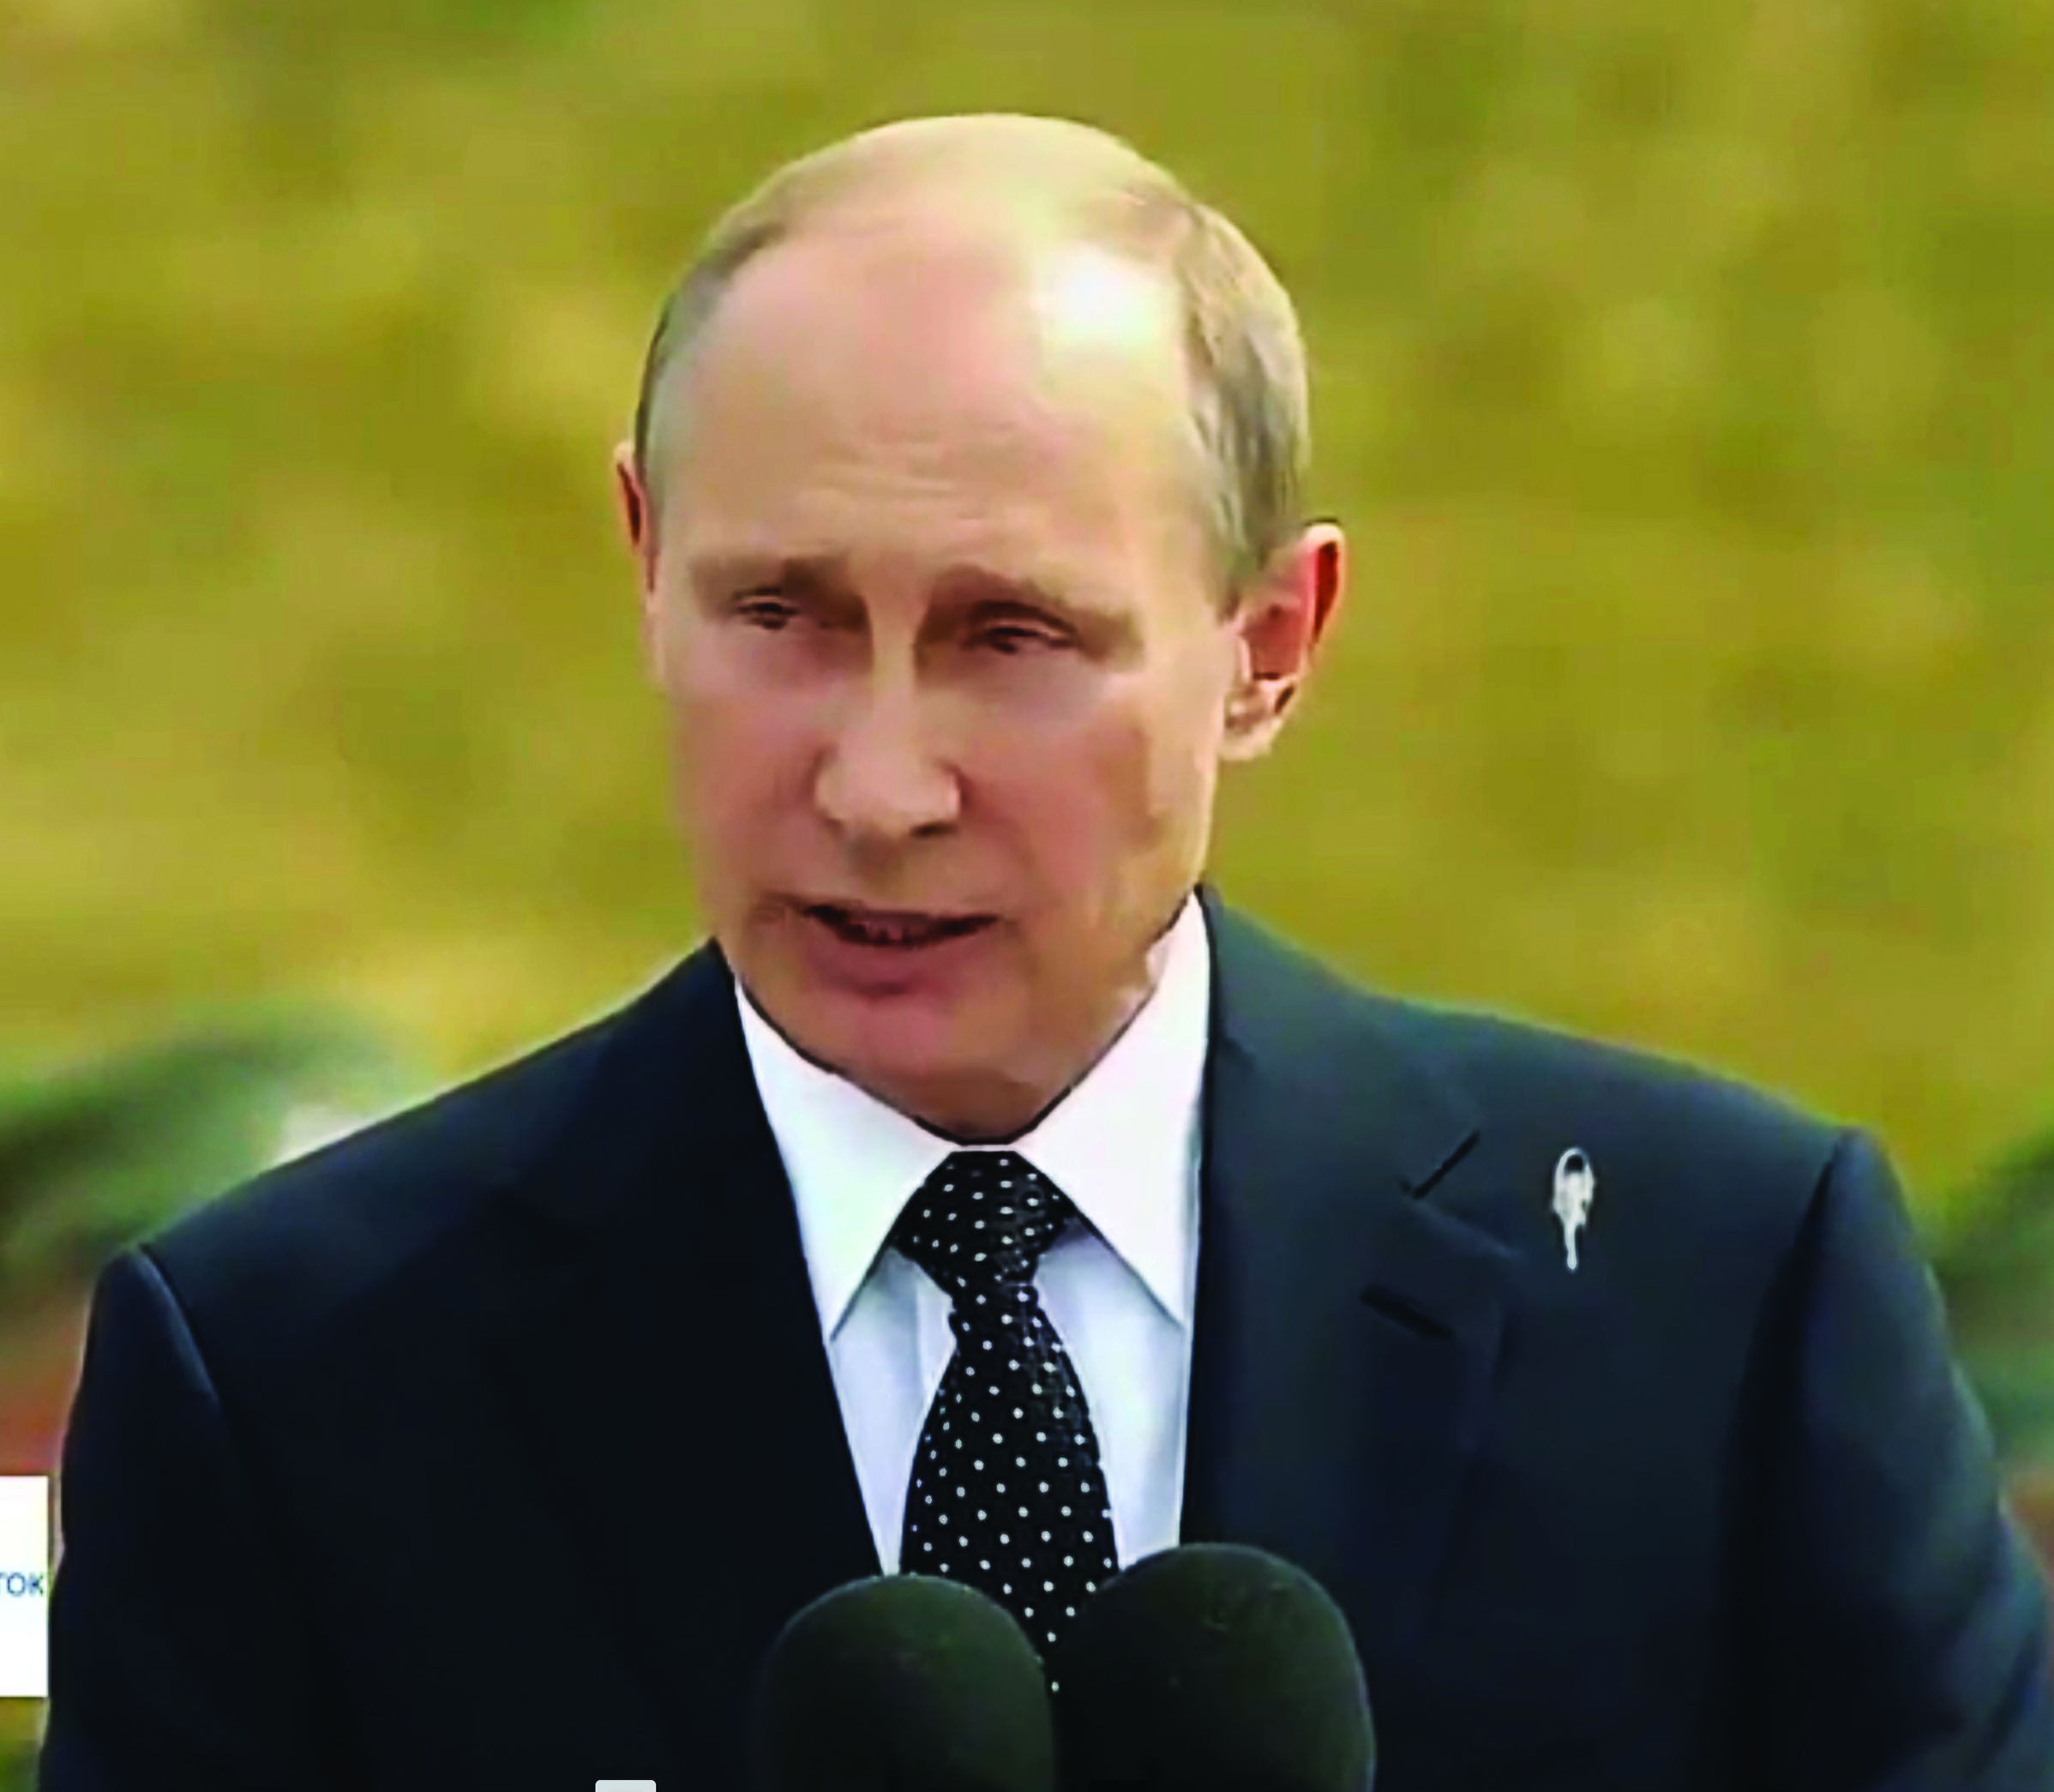 Vladimir Putin wearing a suit with a black polka-dotted tie.